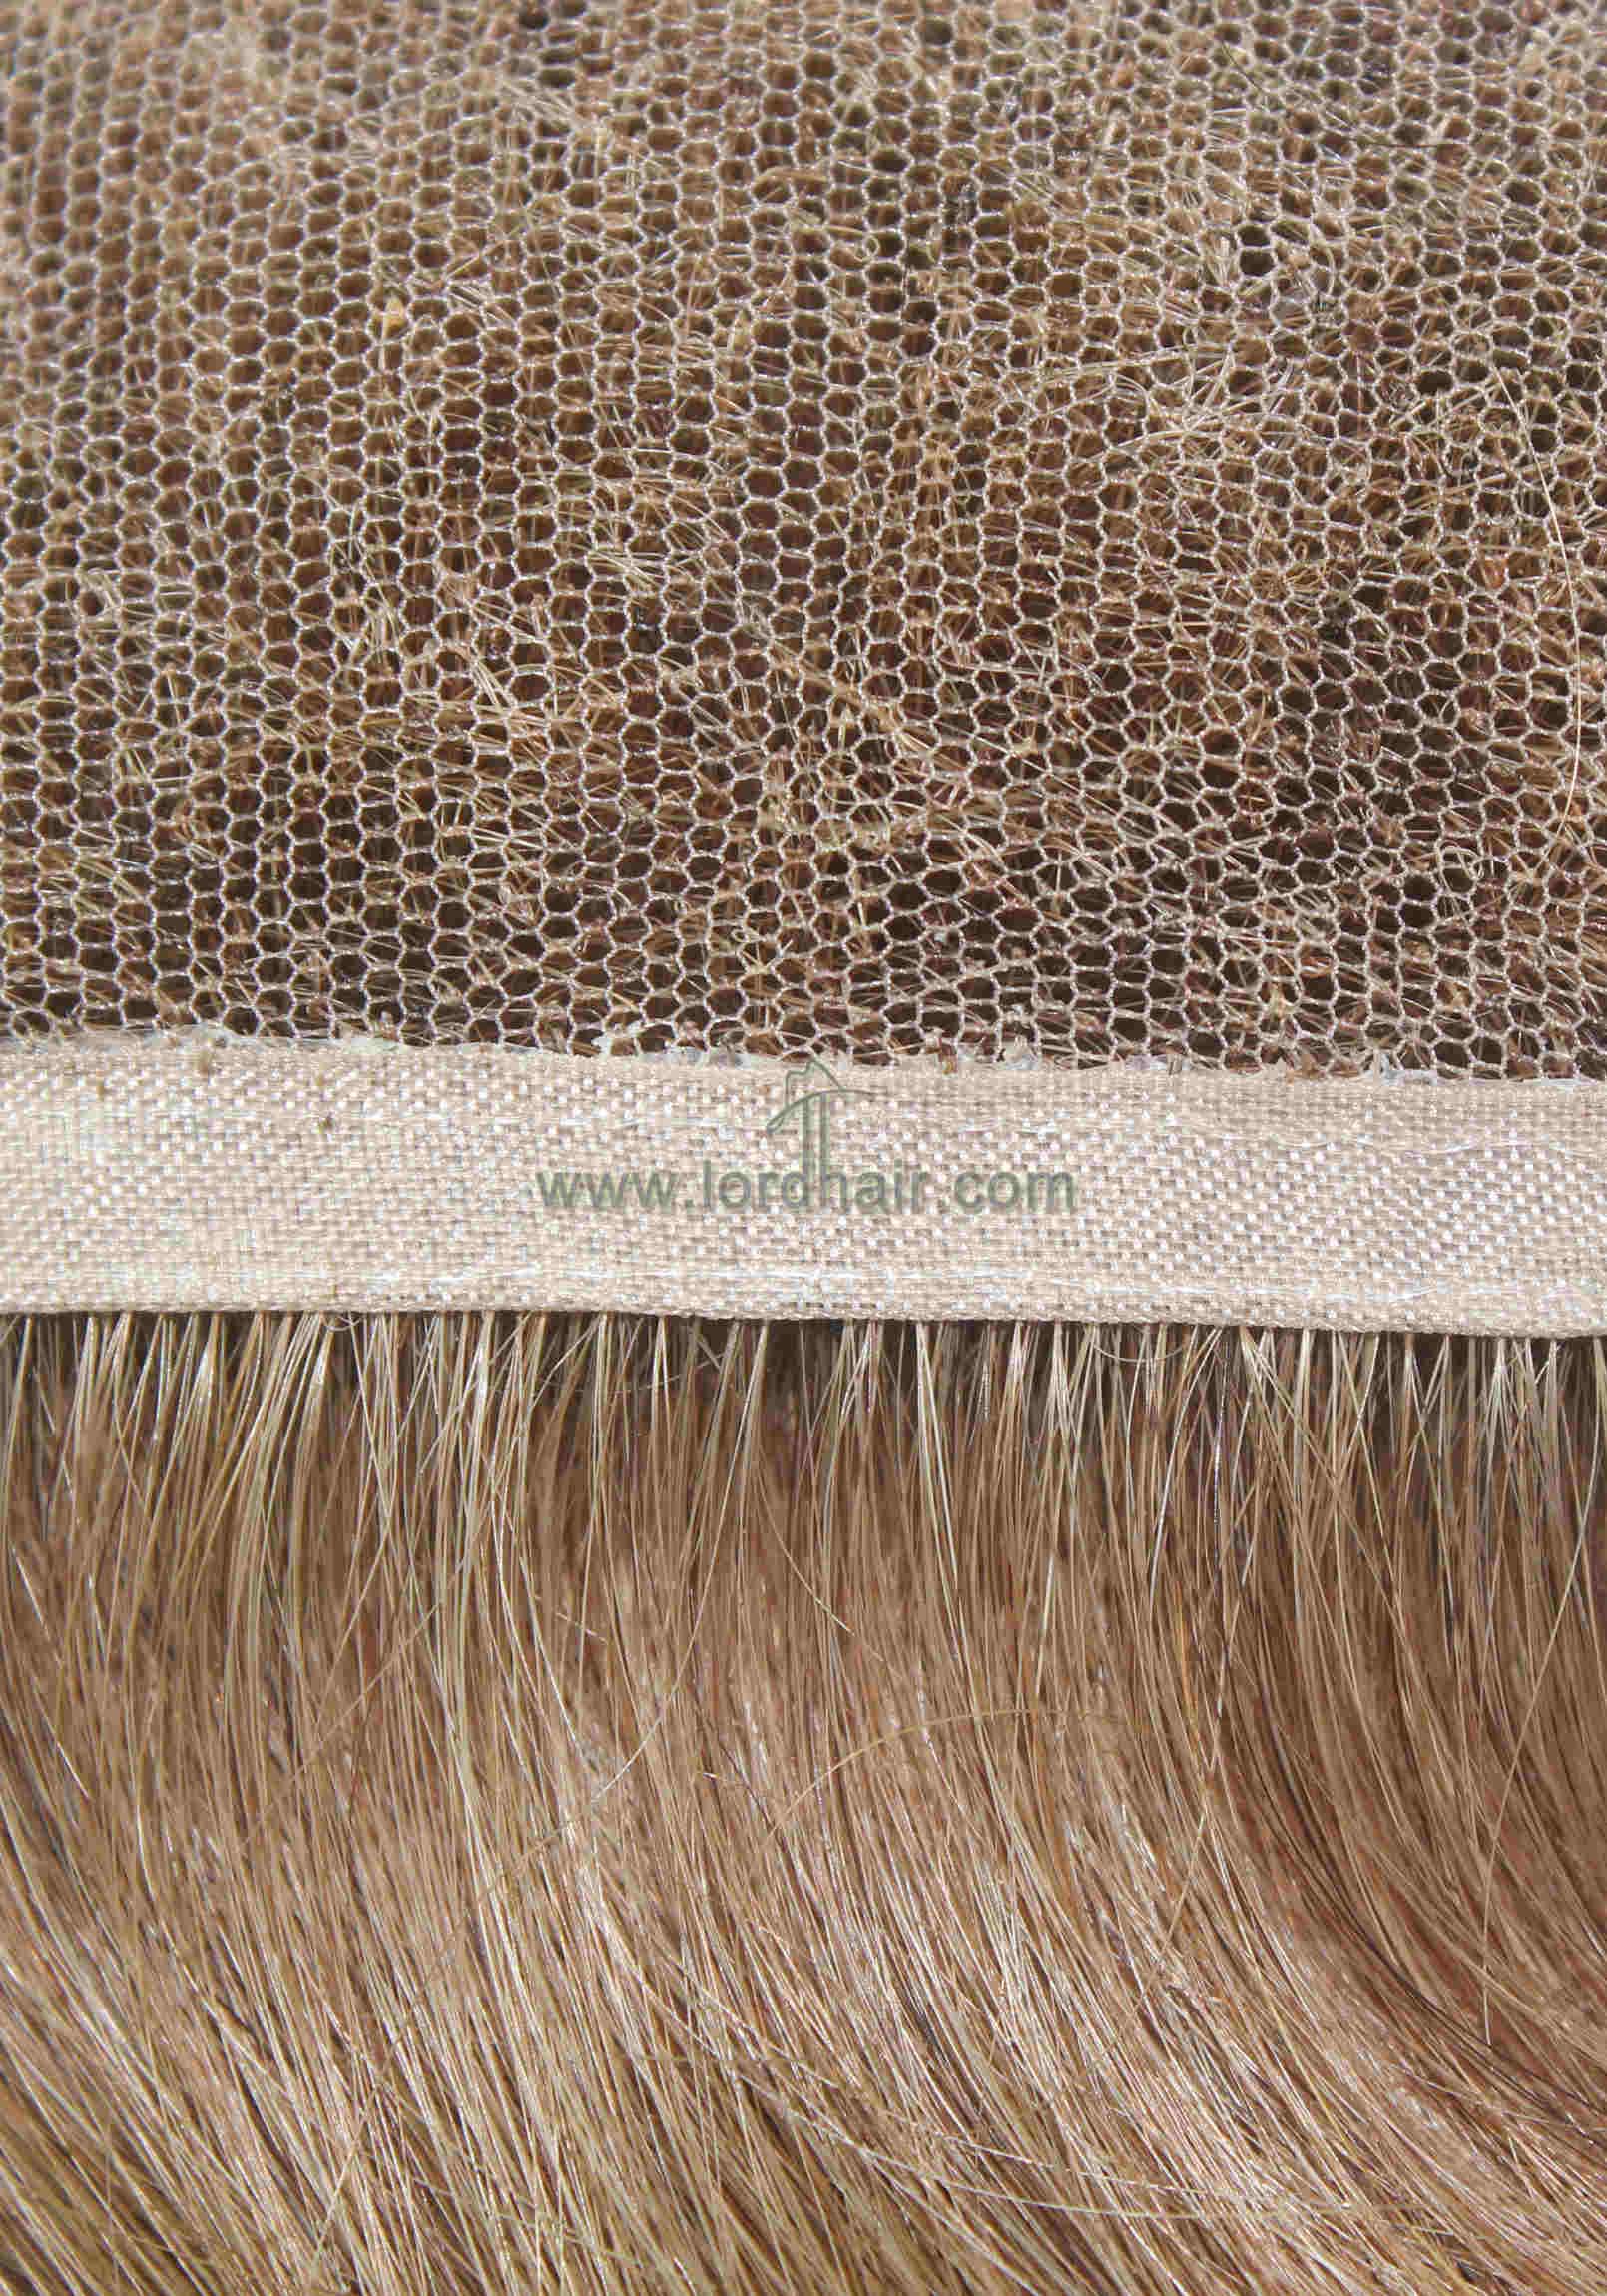 YJ1025: French lace with Ribbon Edge Indian Human Hair System